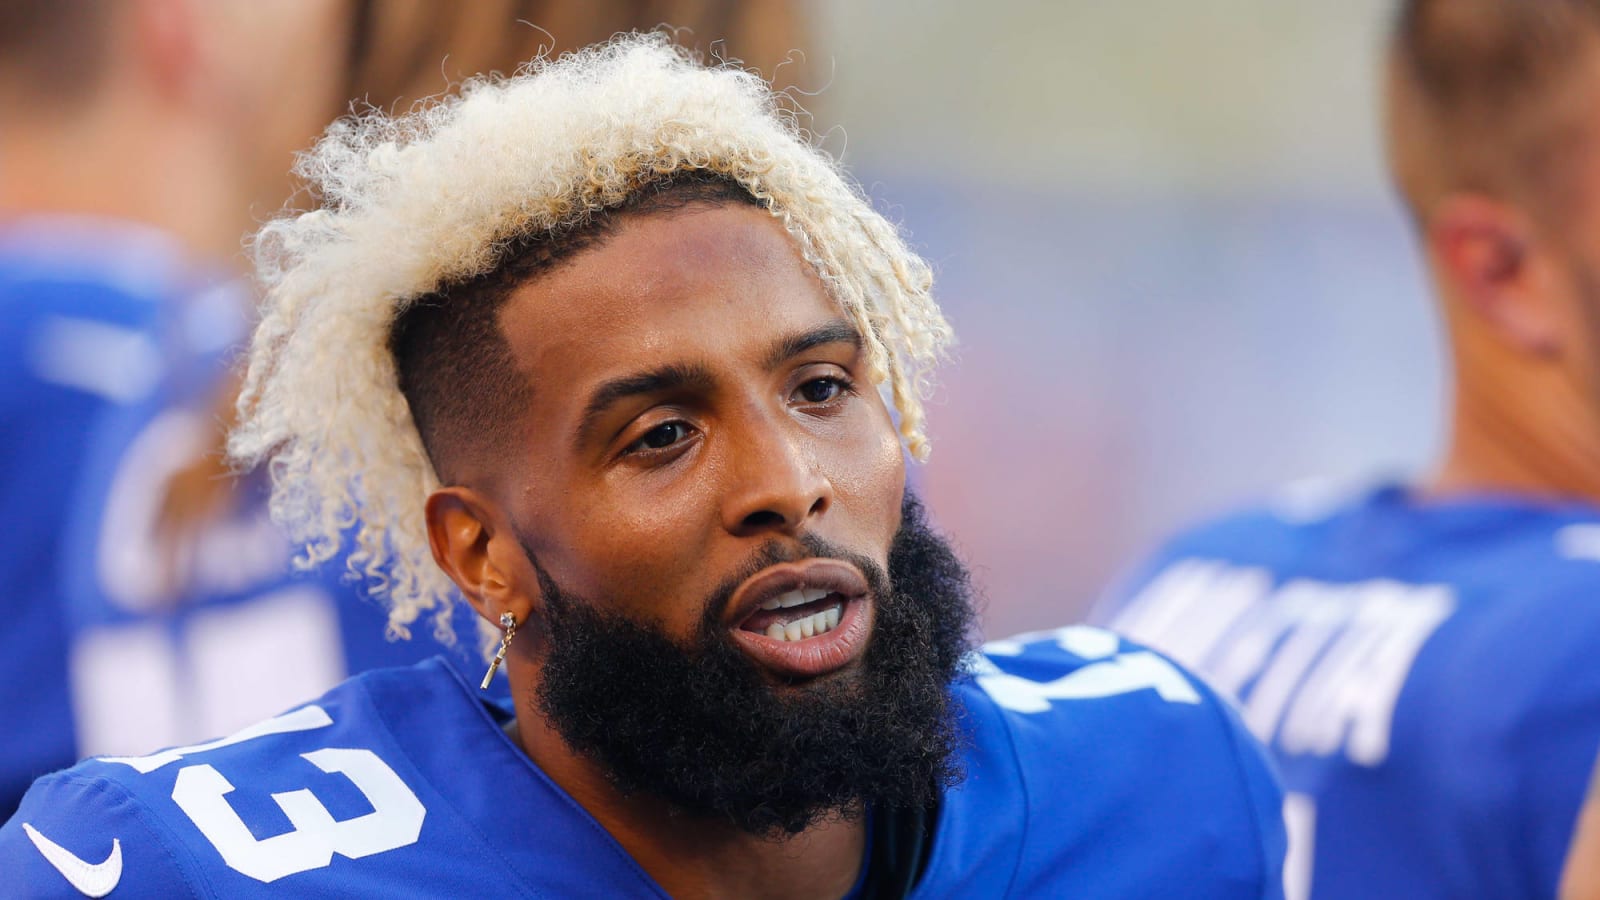 Odell Beckham Jr. has massive tattoo that spans his entire back